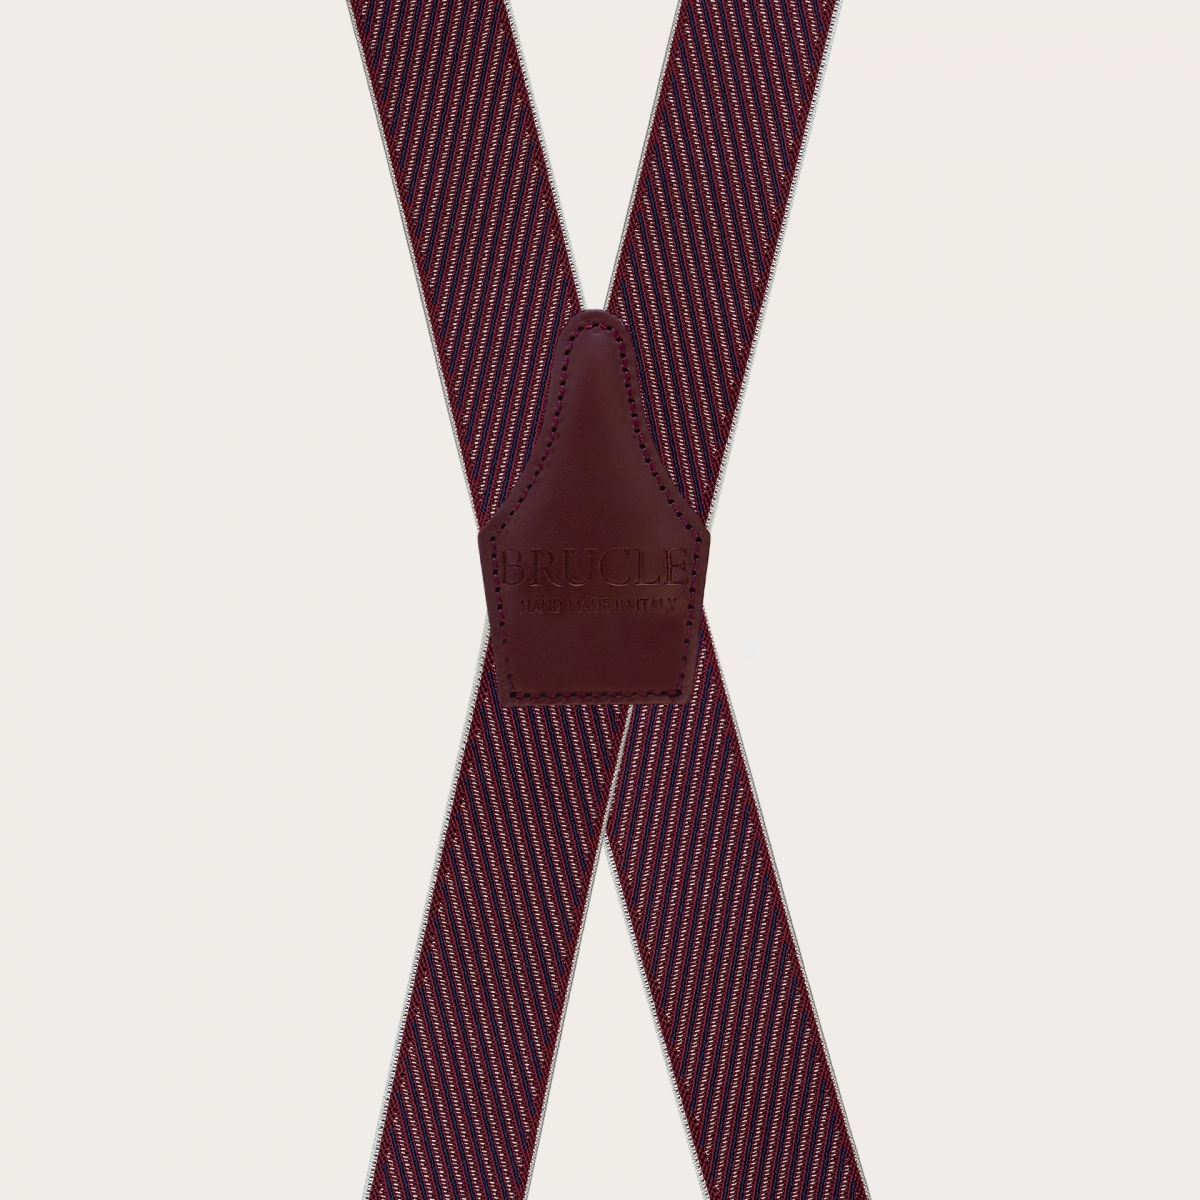 Men's burgundy X-shaped suspenders with diagonal stripes, clip only